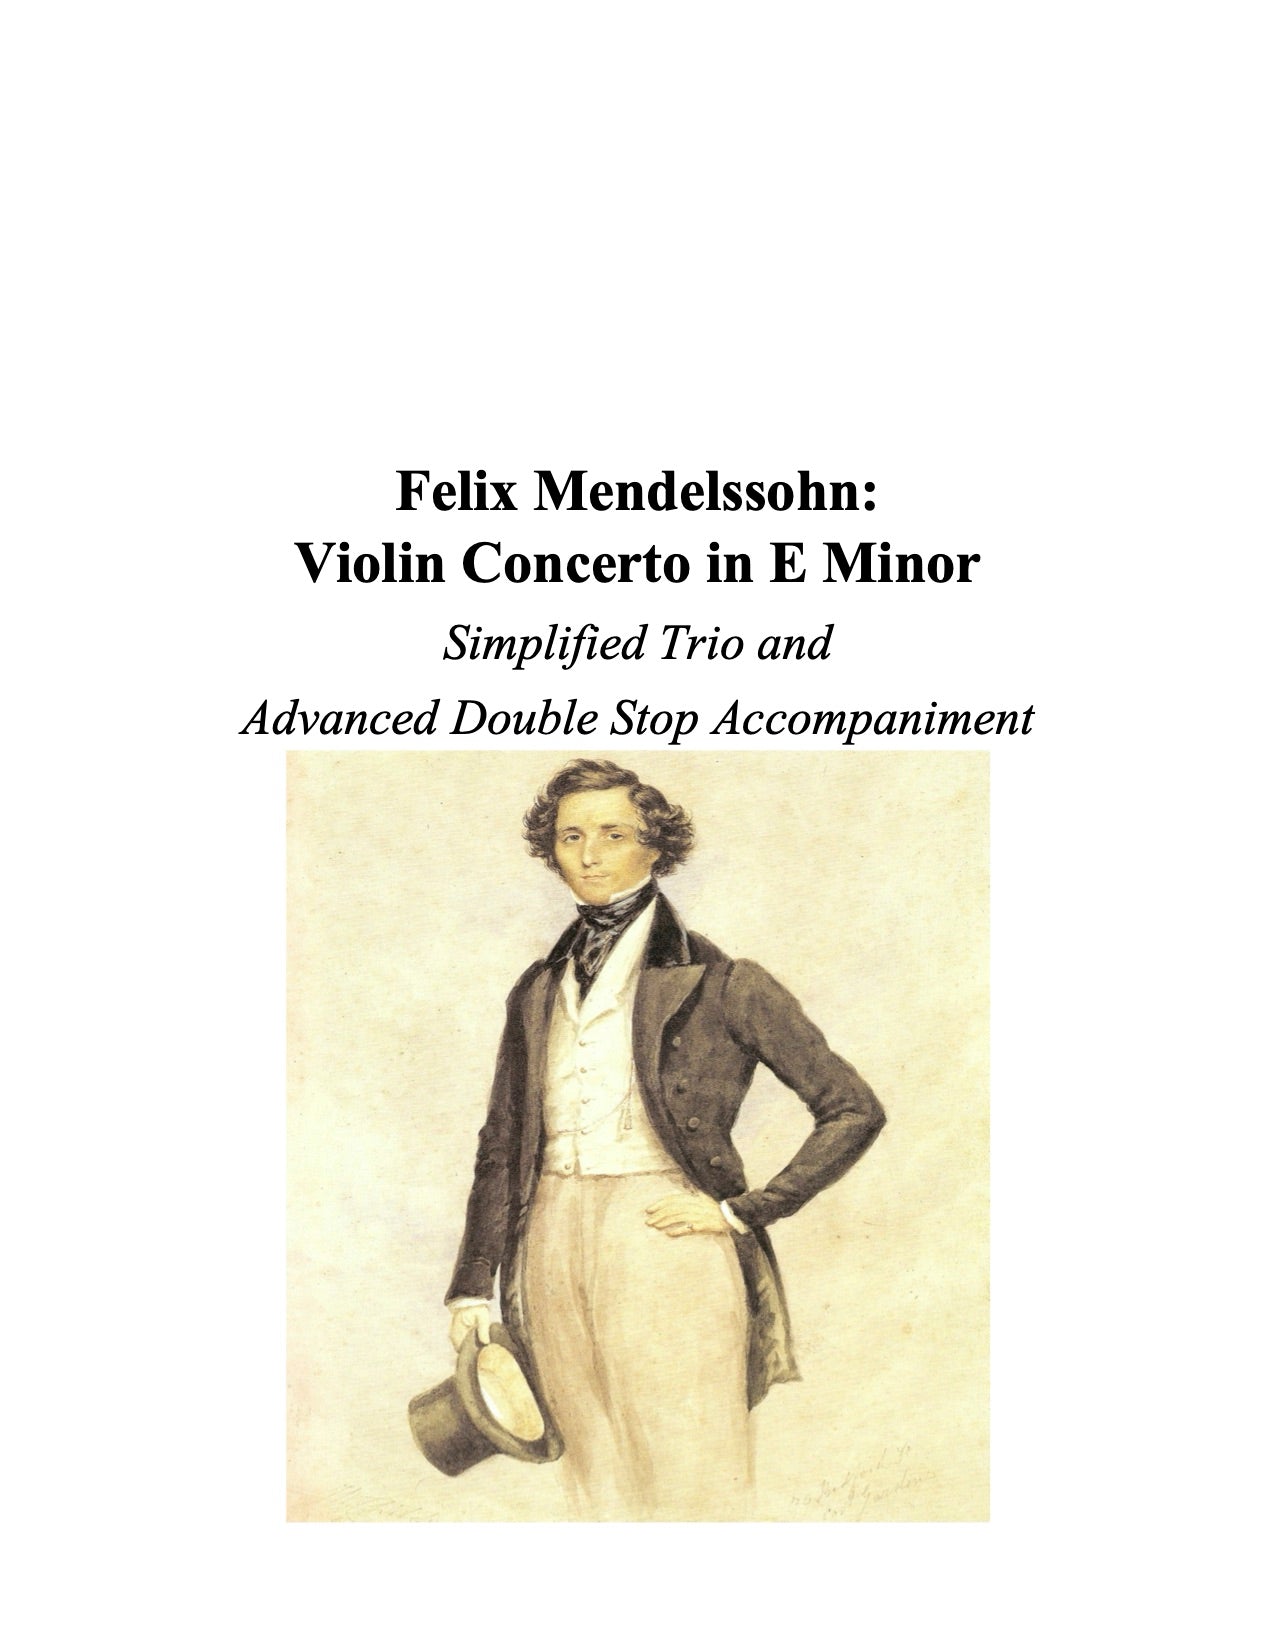 106 - The Mendelssohn Violin Concerto: Simplified Trio and Advanced Double Stop Accompaniment